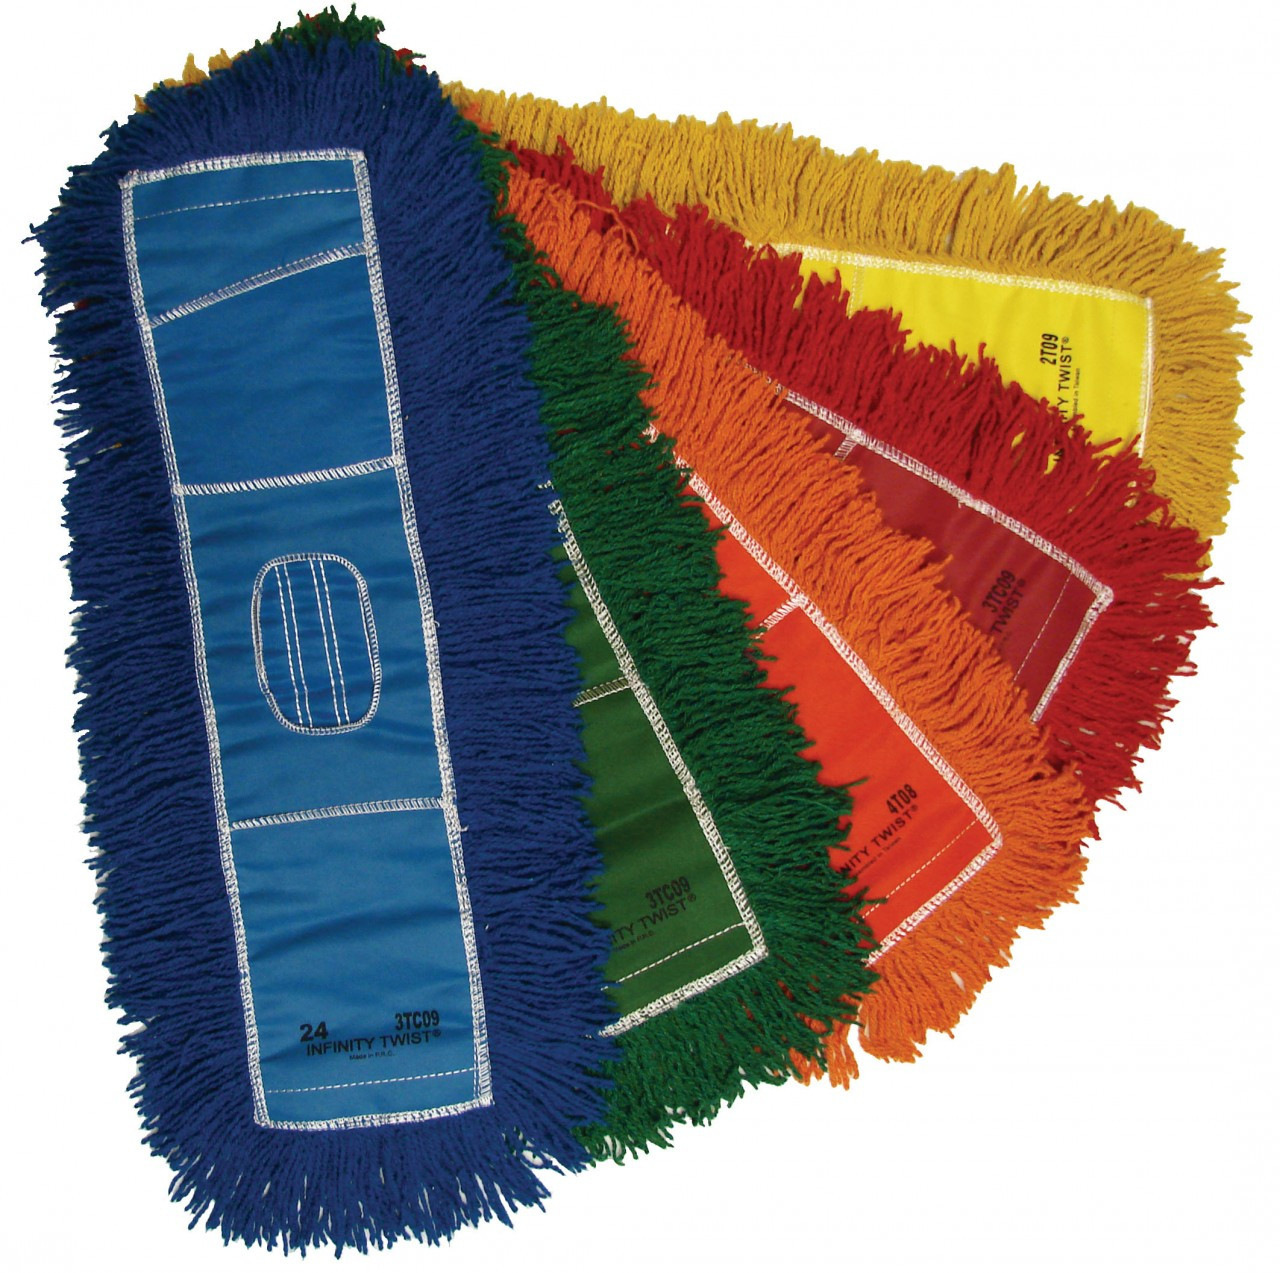 Golden Star ACB30ITRB Infinity Twist Dust Mop Head with Combination Style Backing Pack of 12 